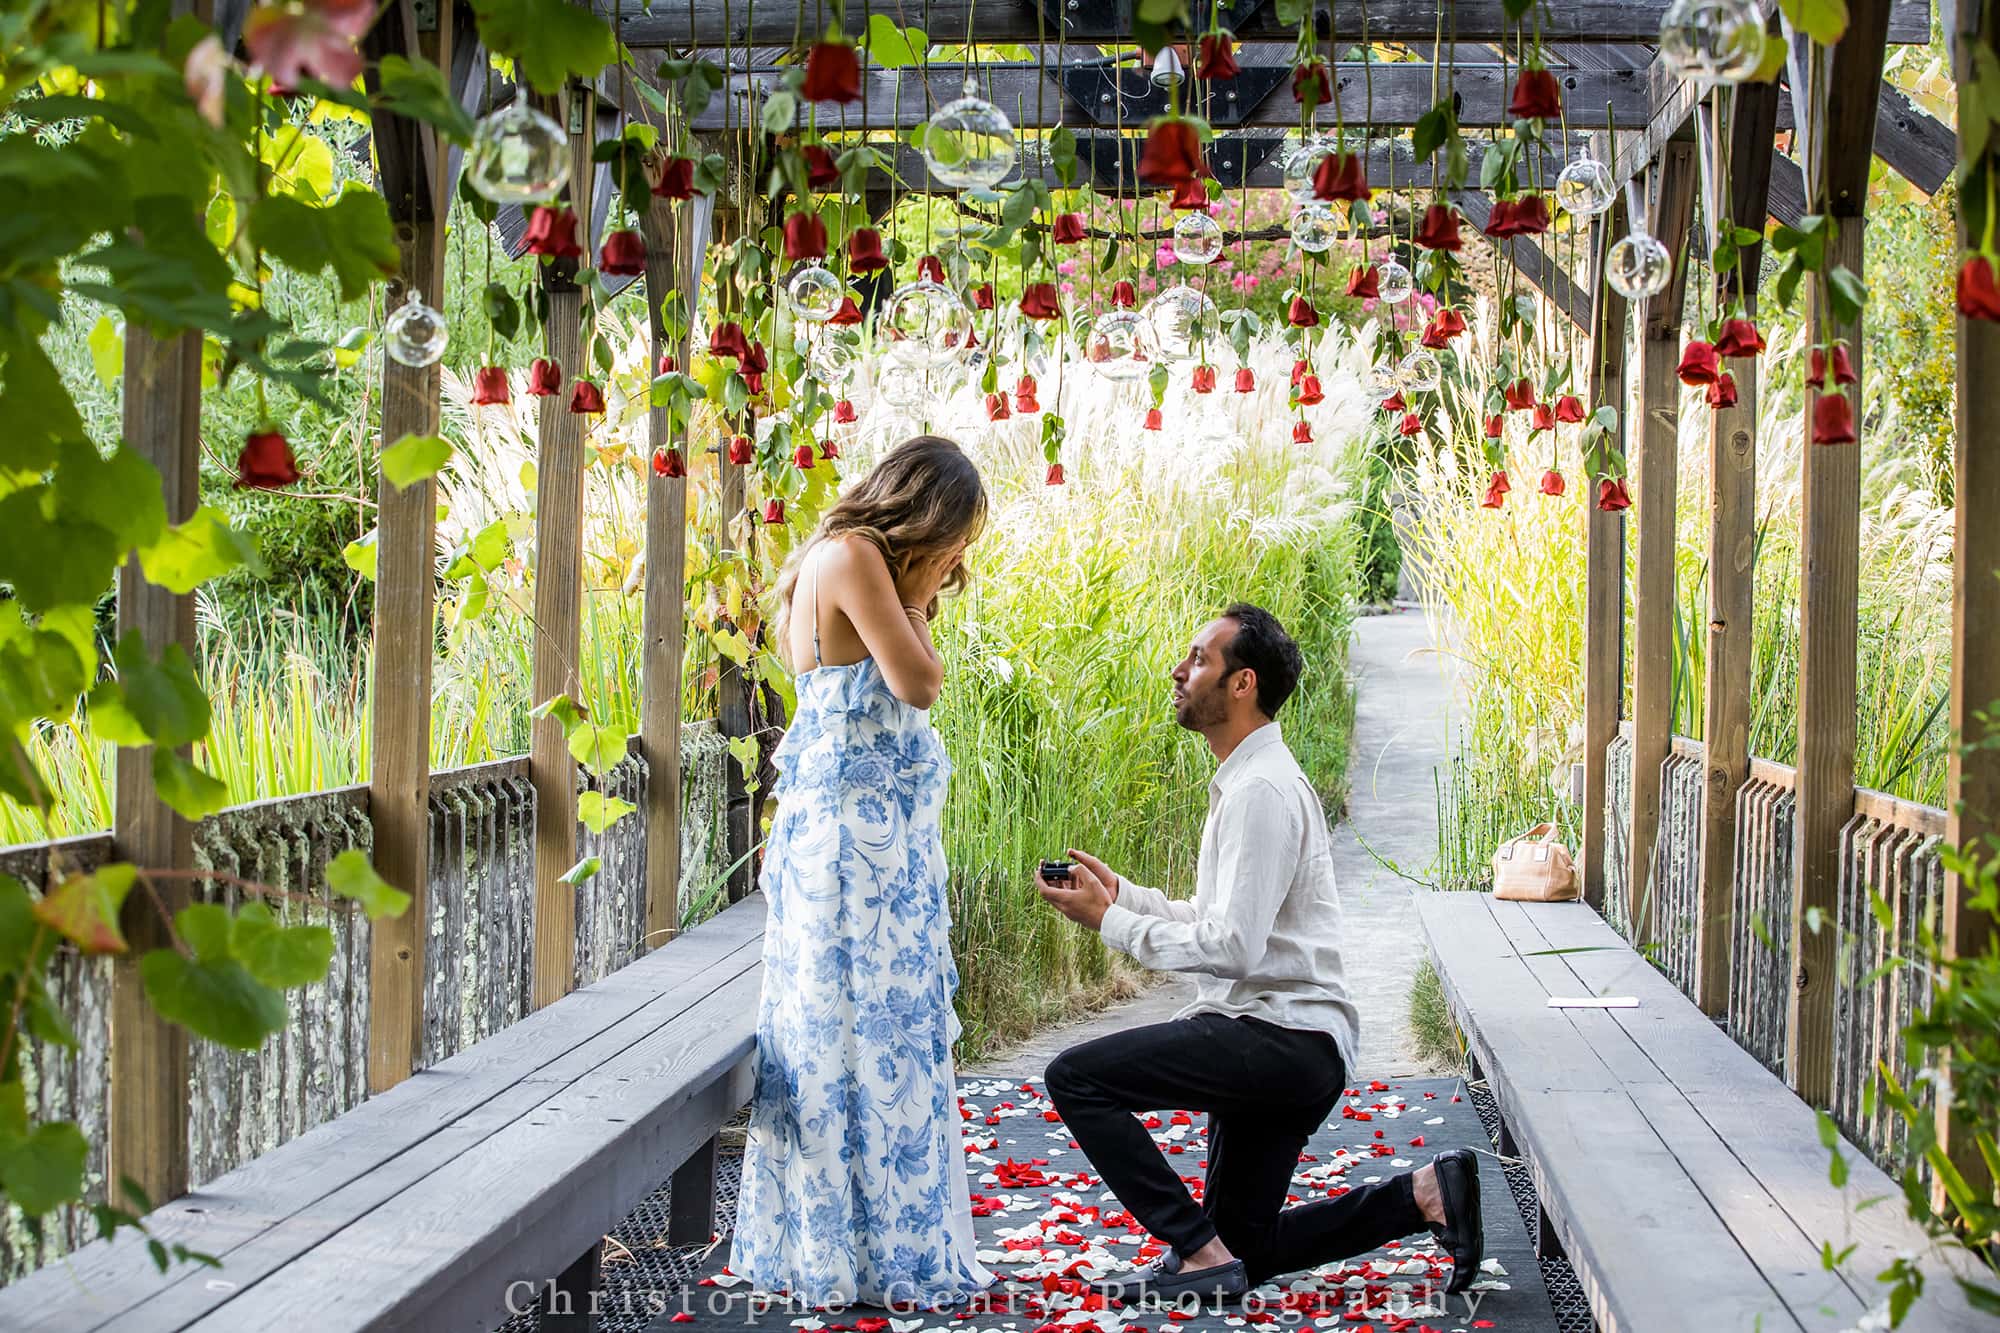 Best Proposal Wineries in The Napa Valley